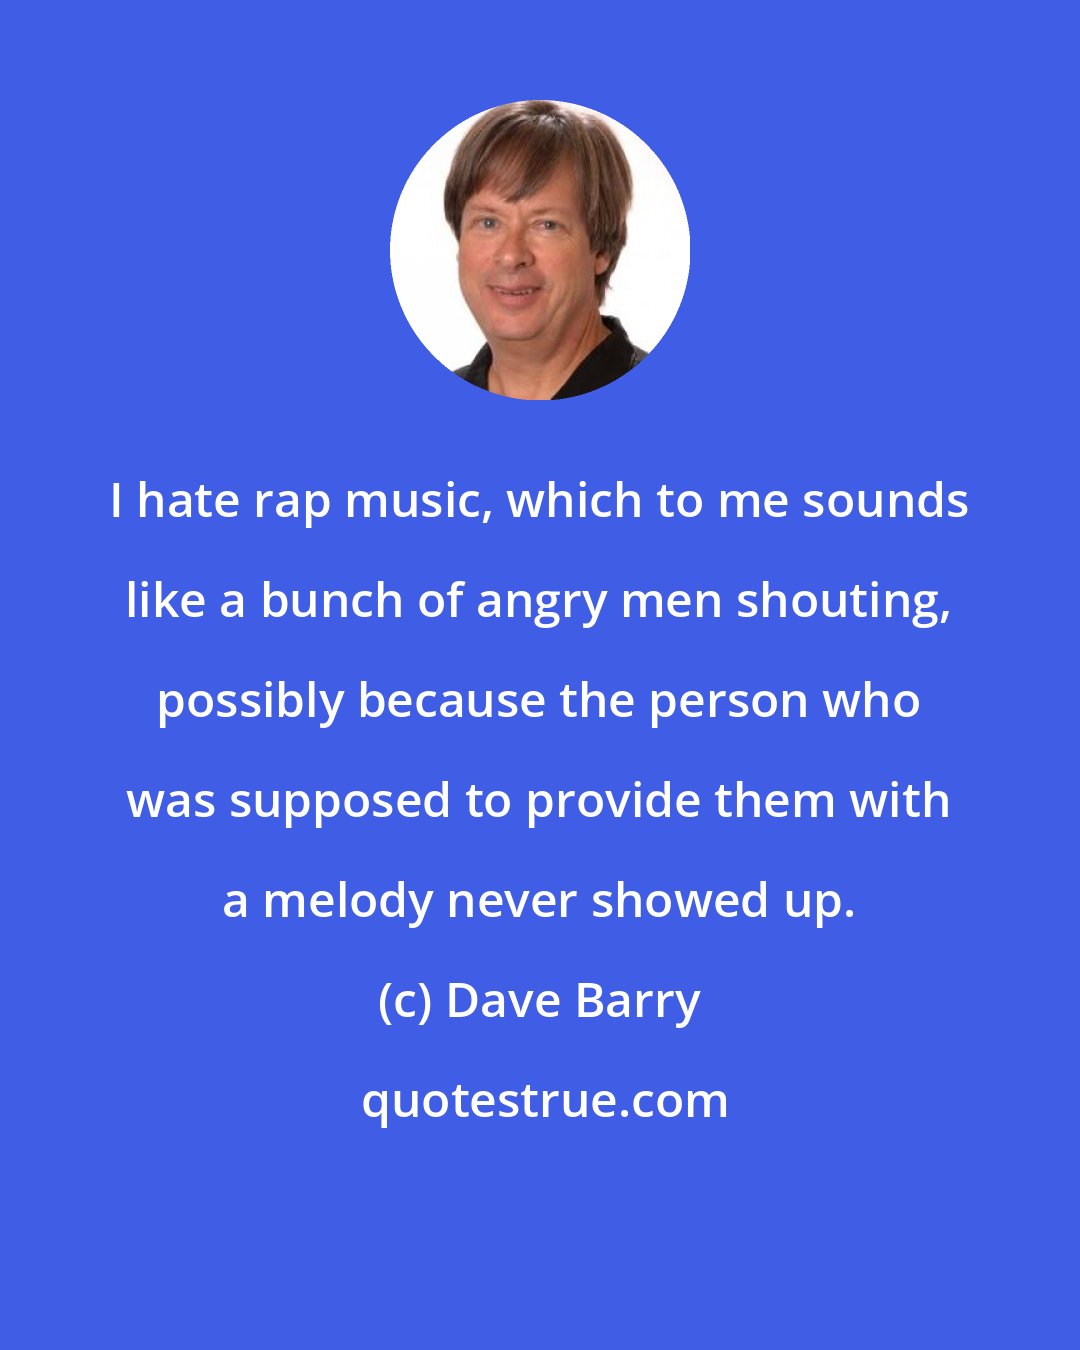 Dave Barry: I hate rap music, which to me sounds like a bunch of angry men shouting, possibly because the person who was supposed to provide them with a melody never showed up.